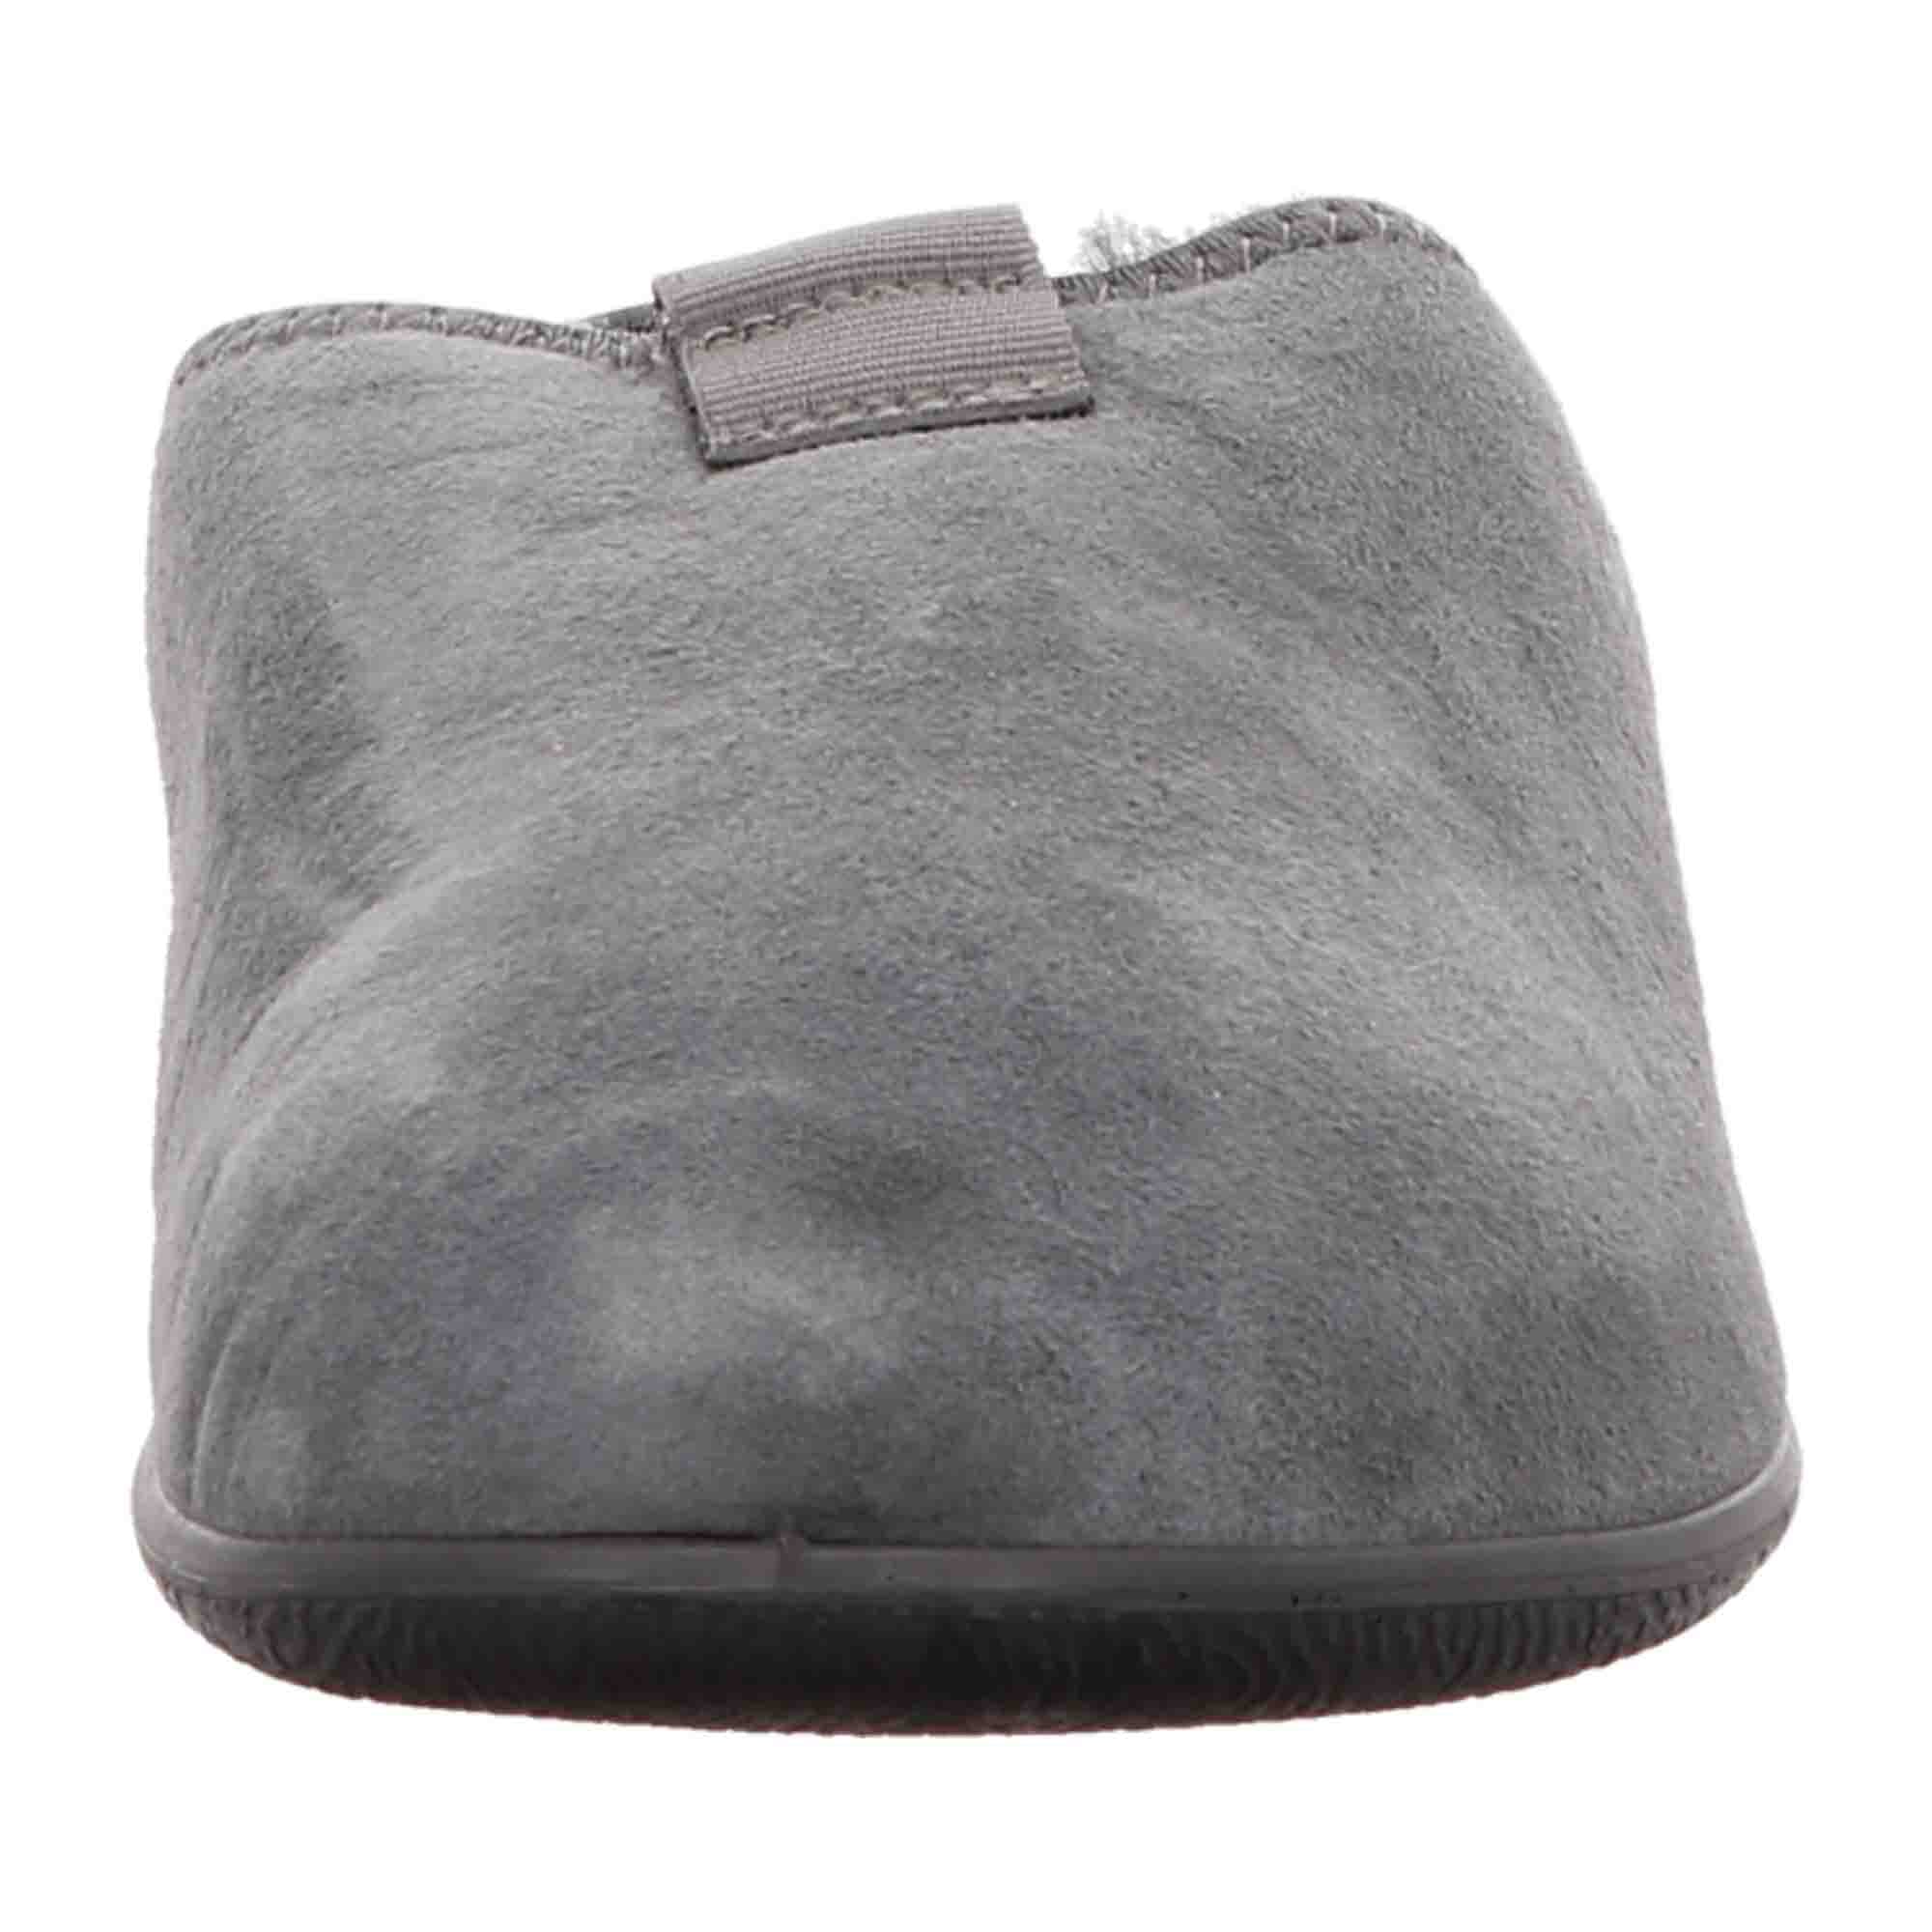 Ecco Easy Men's Grey House Slippers with Warm Lining